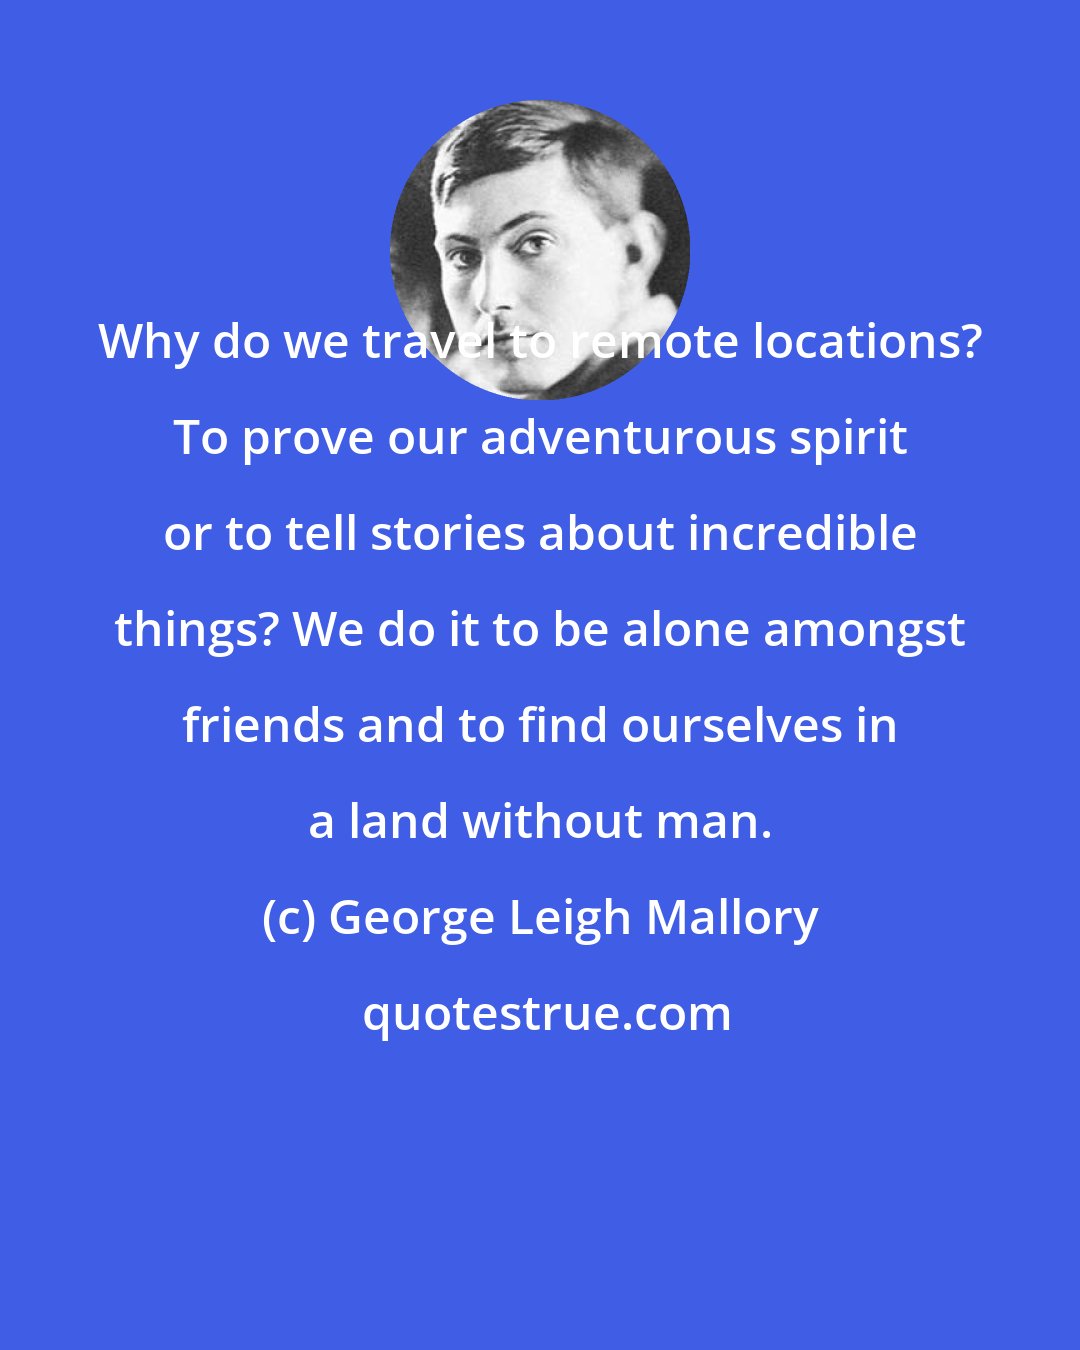 George Leigh Mallory: Why do we travel to remote locations? To prove our adventurous spirit or to tell stories about incredible things? We do it to be alone amongst friends and to find ourselves in a land without man.